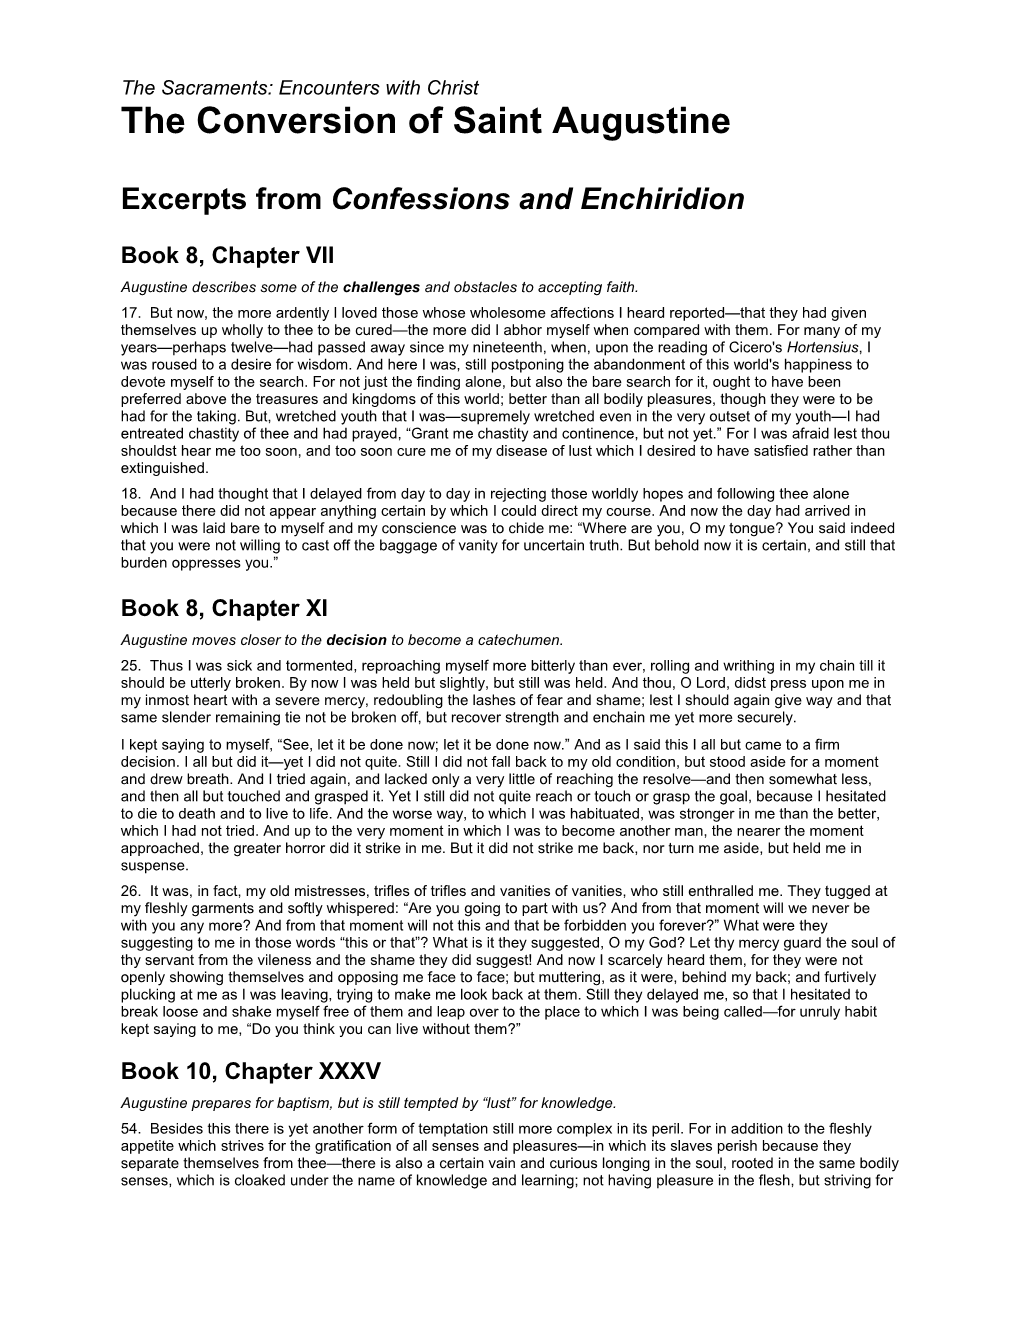 Excerpts Fromconfessions and Enchiridion